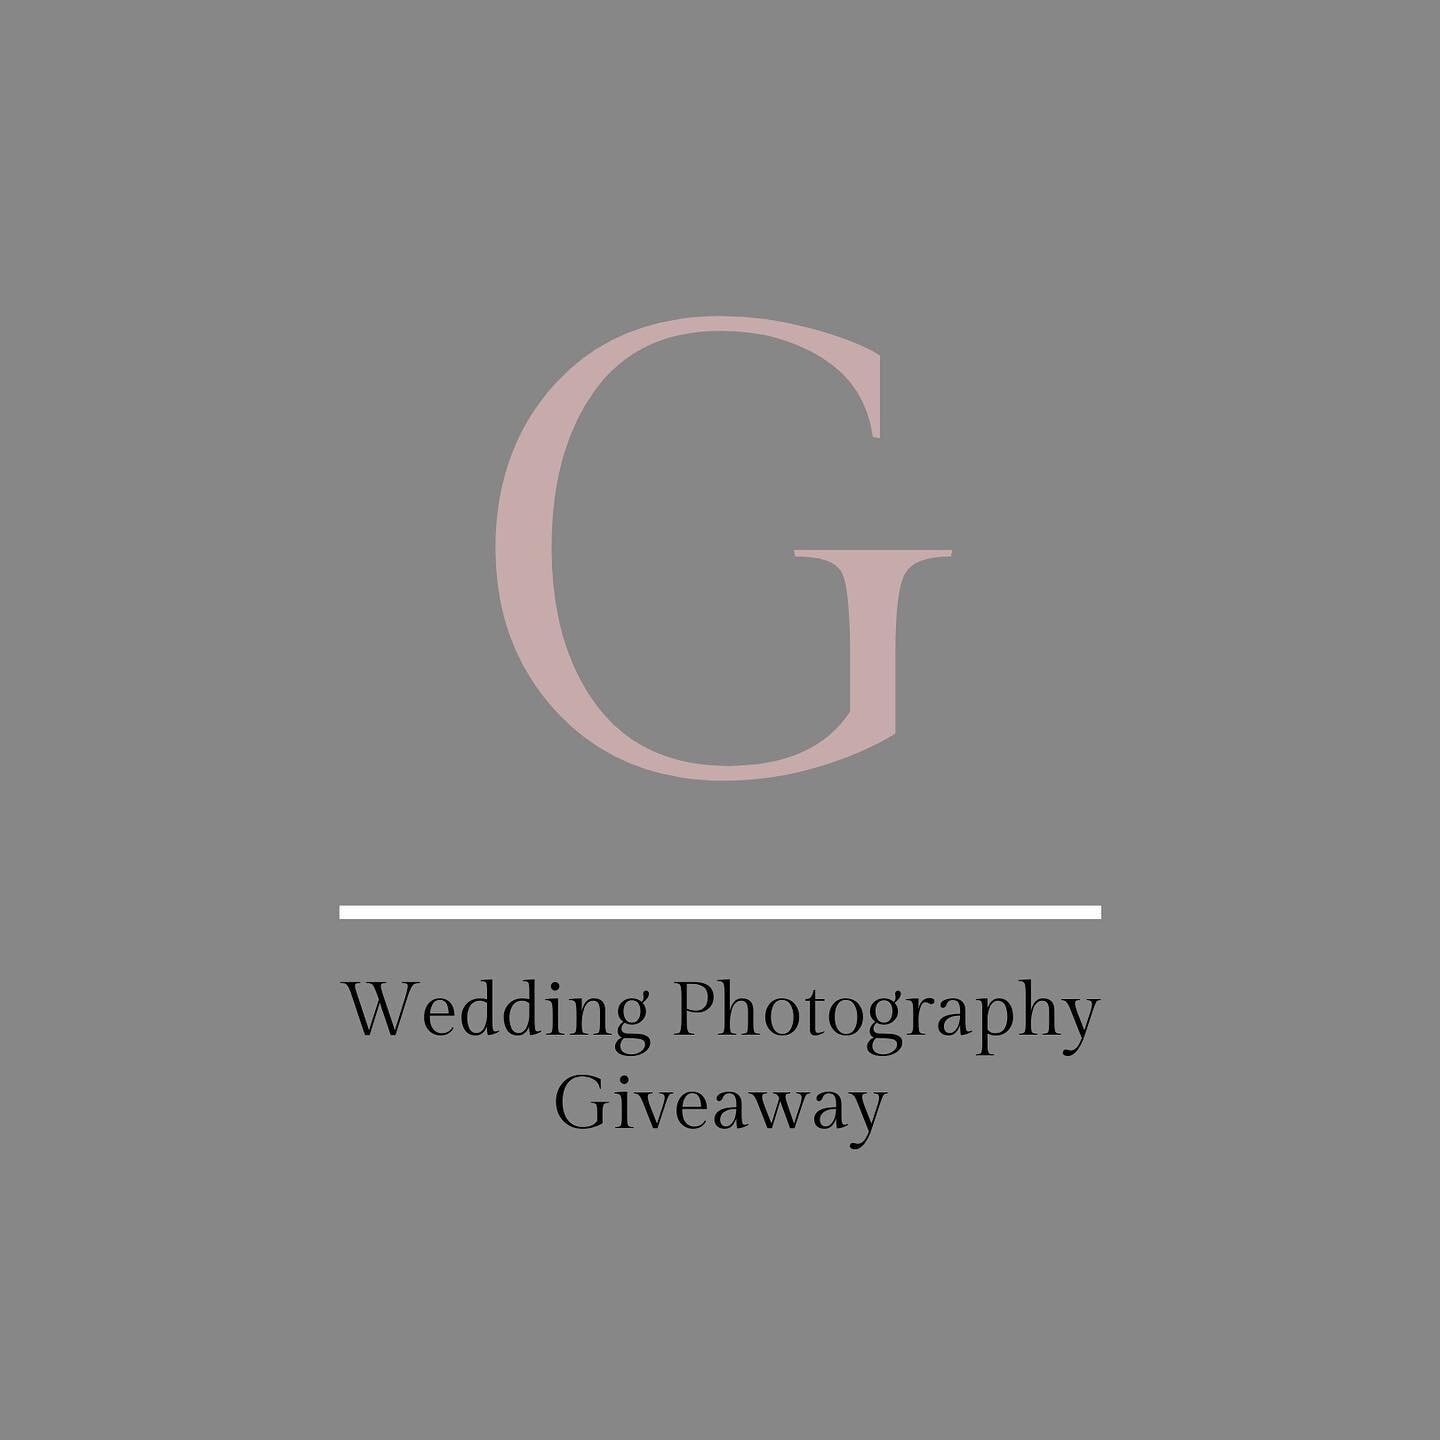 🤍 GIVEAWAY ALERT 🤍
⠀ ⠀⠀⠀⠀⠀⠀⠀⠀⠀ ⠀⠀⠀⠀⠀⠀⠀
To celebrate our love for weddings, we are giving away a complete wedding or elopement photography package to one lucky couple getting married in 2021-2022. You can win a full day of coverage for your wedding 